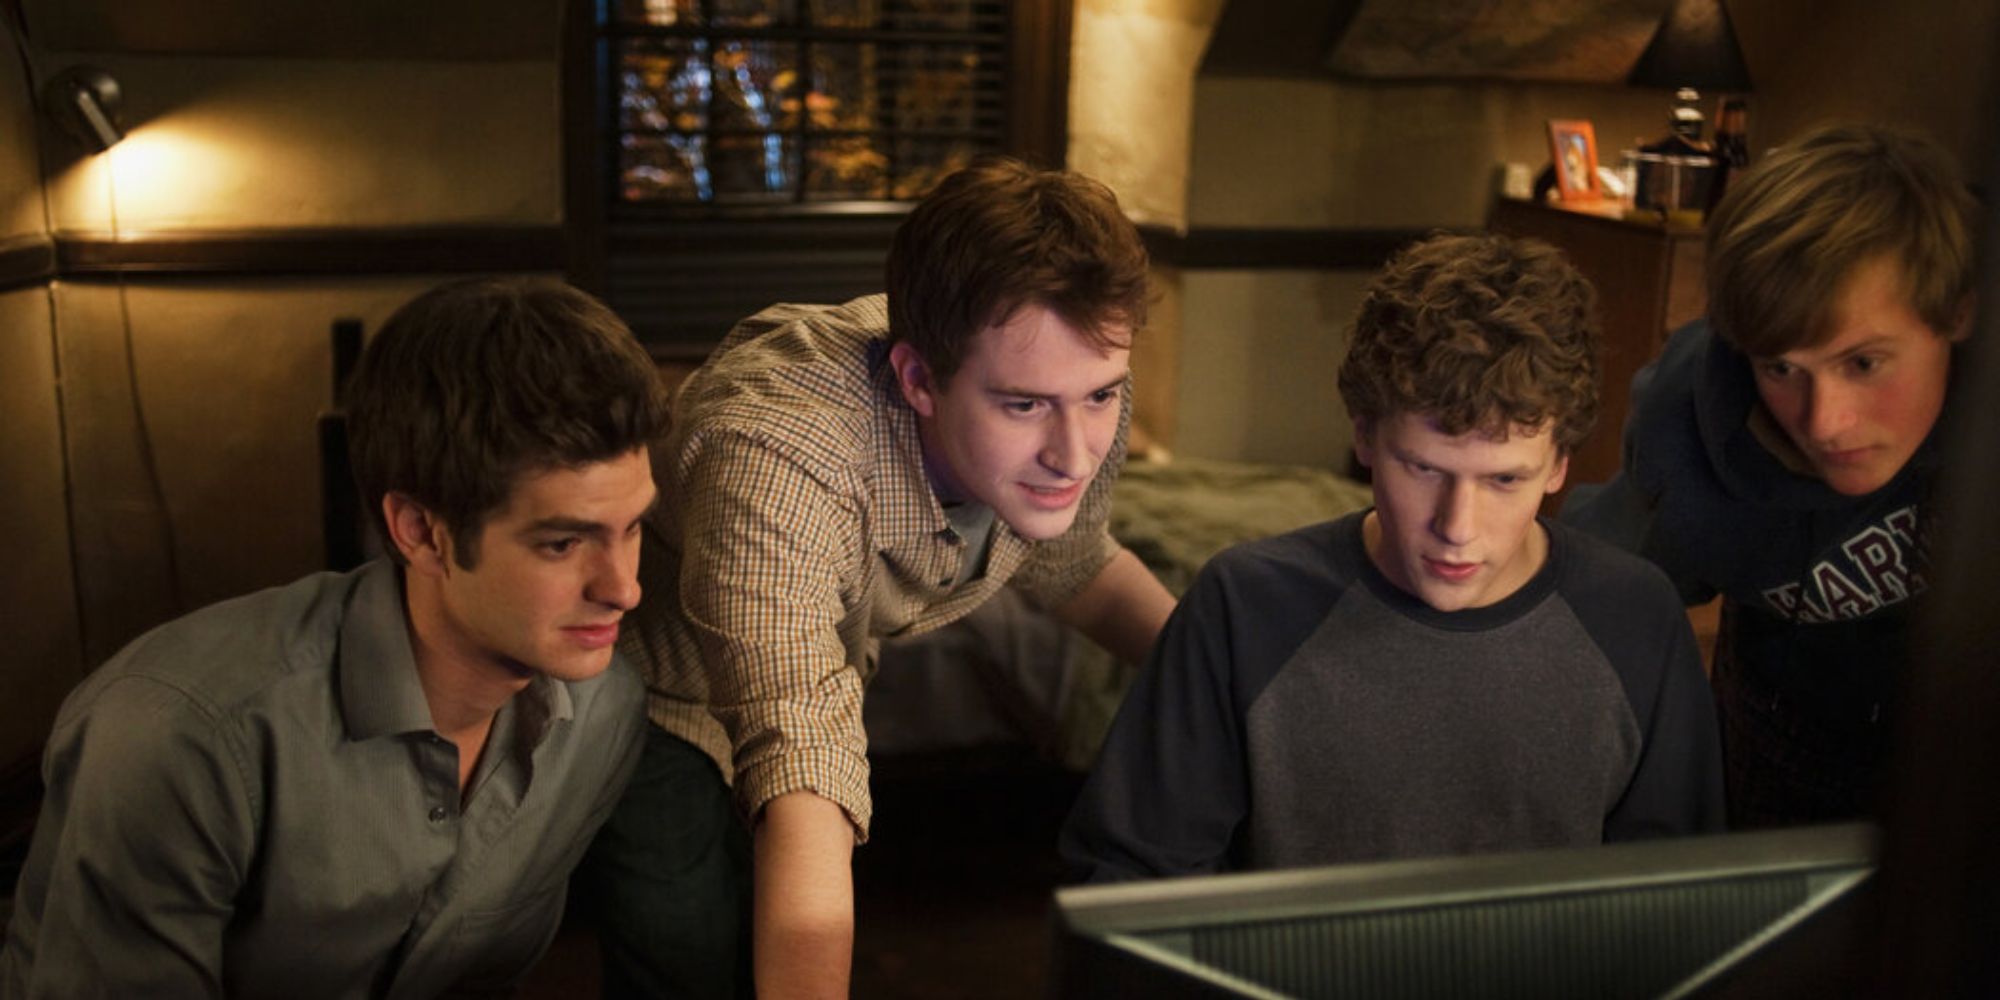 Four men staring at a computer screen in a dorm room